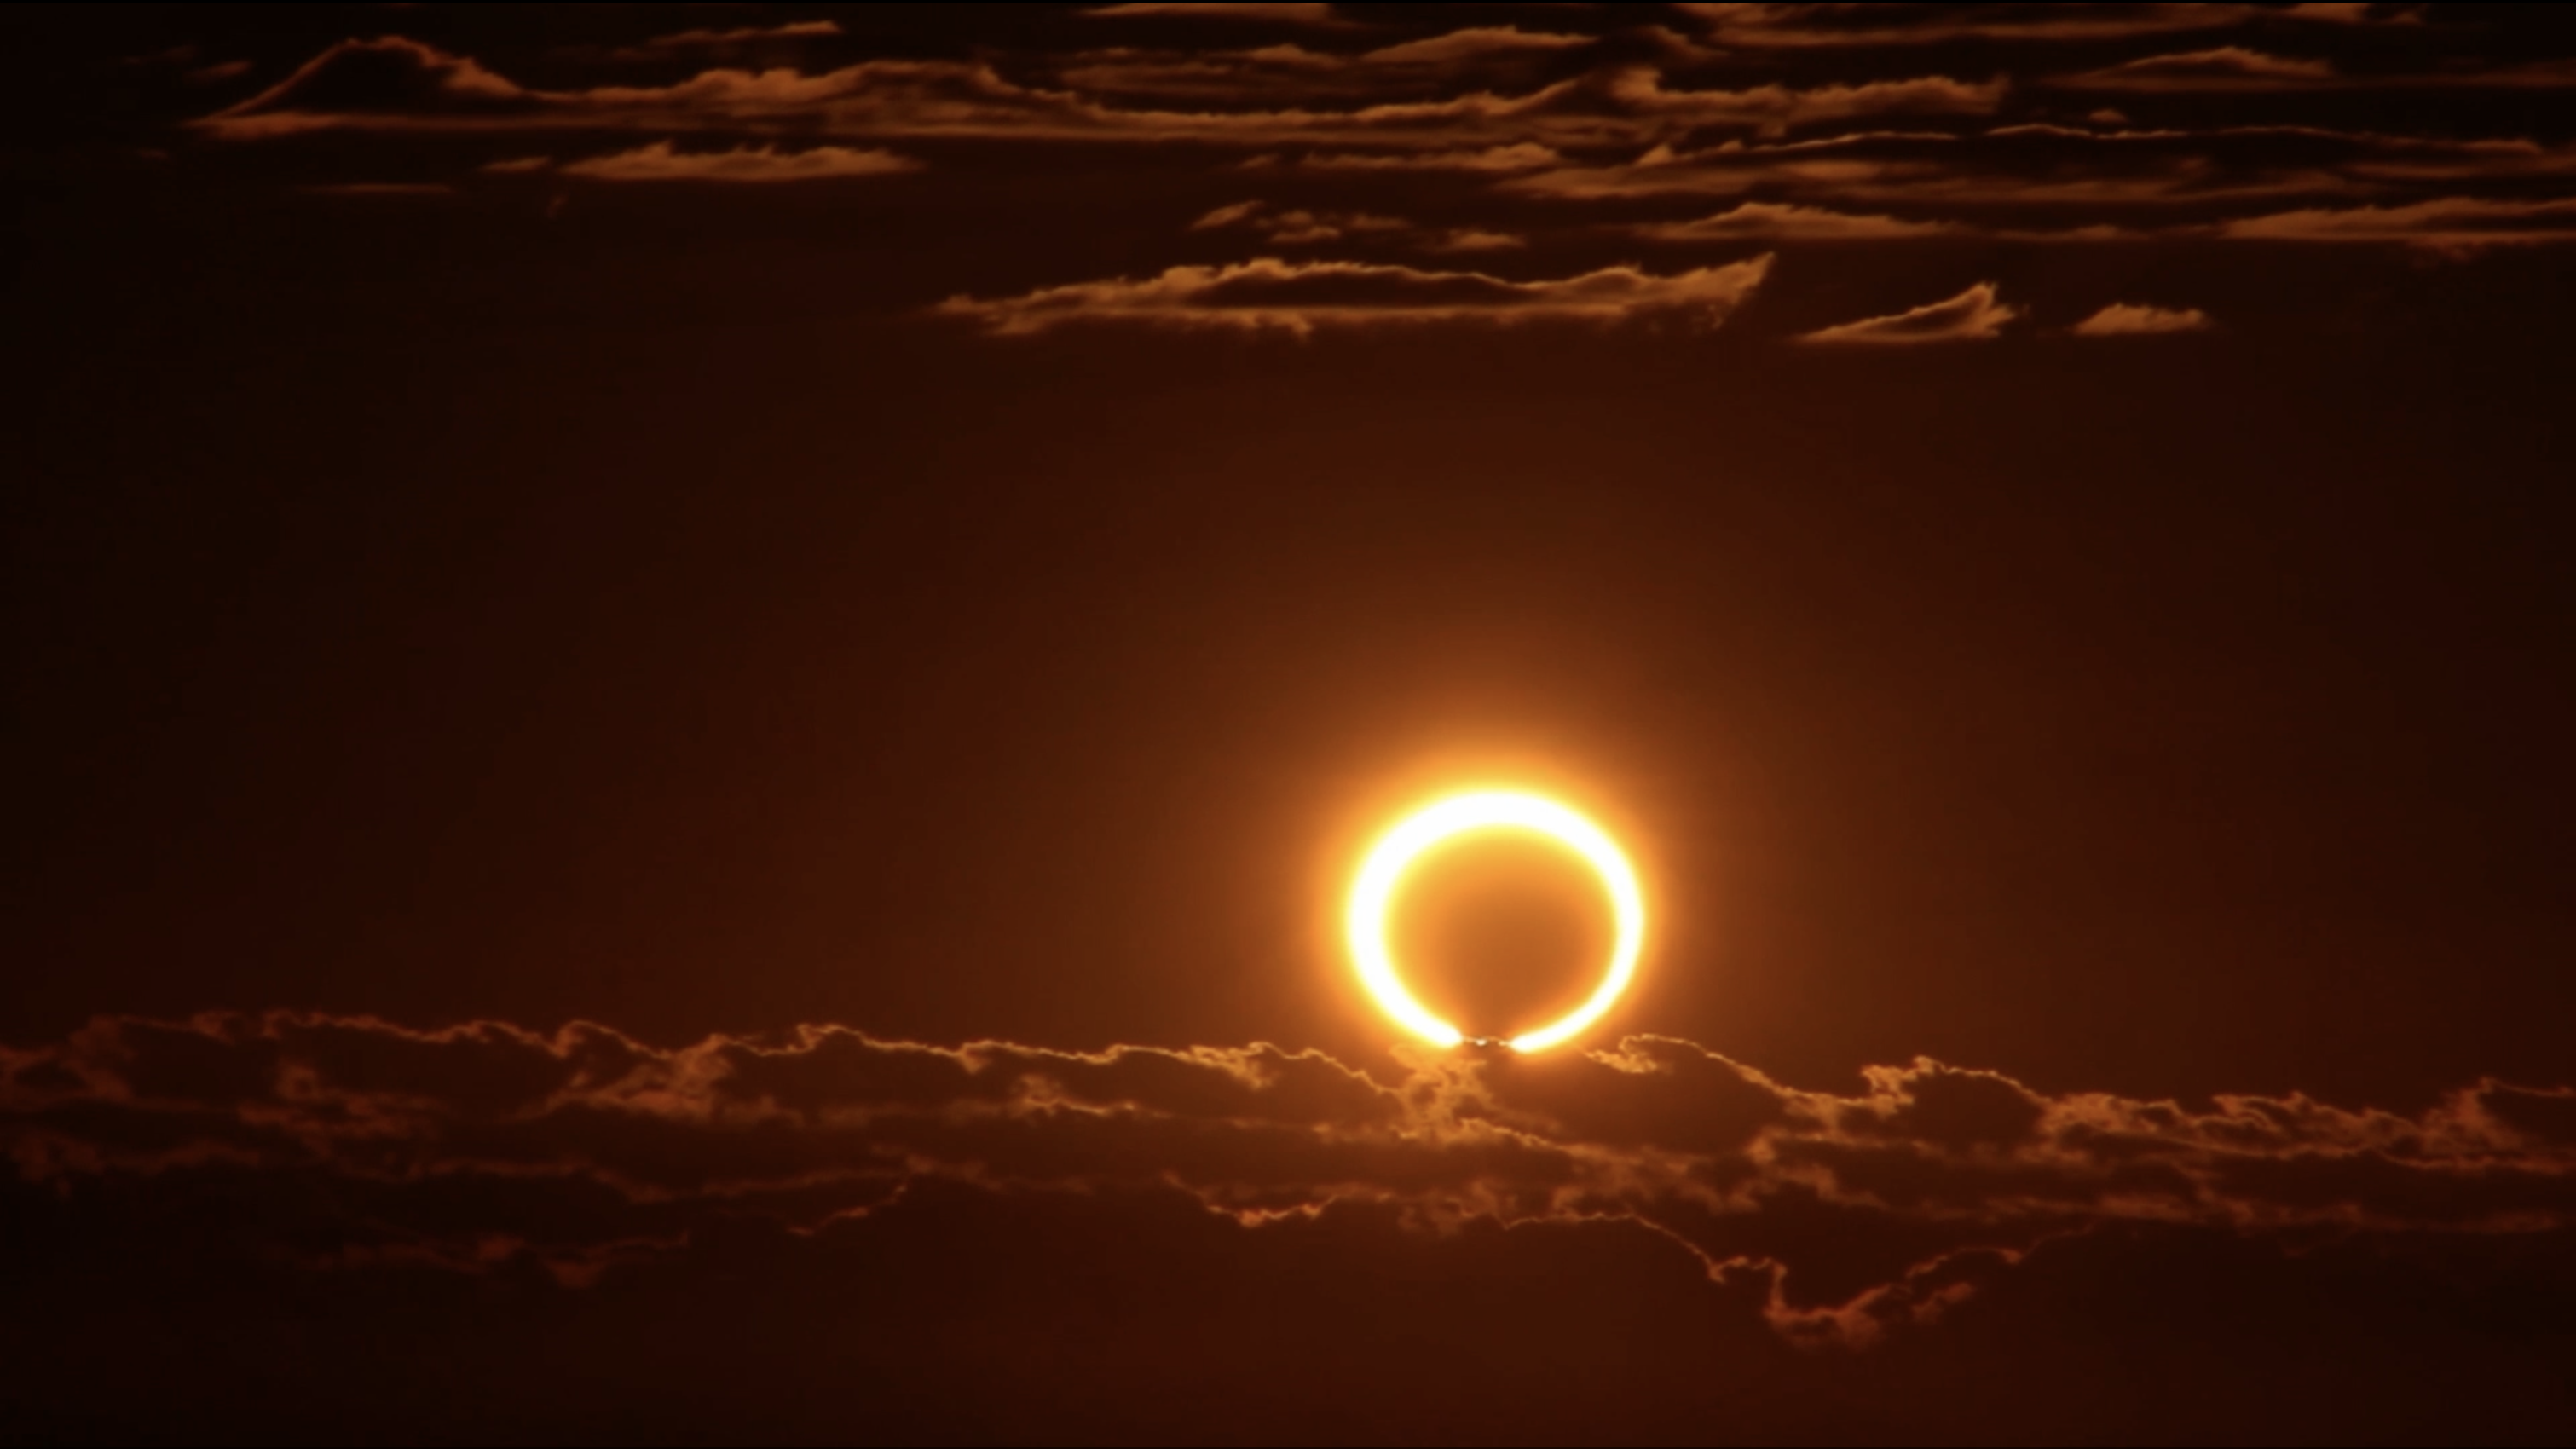 An image of an annular eclipse